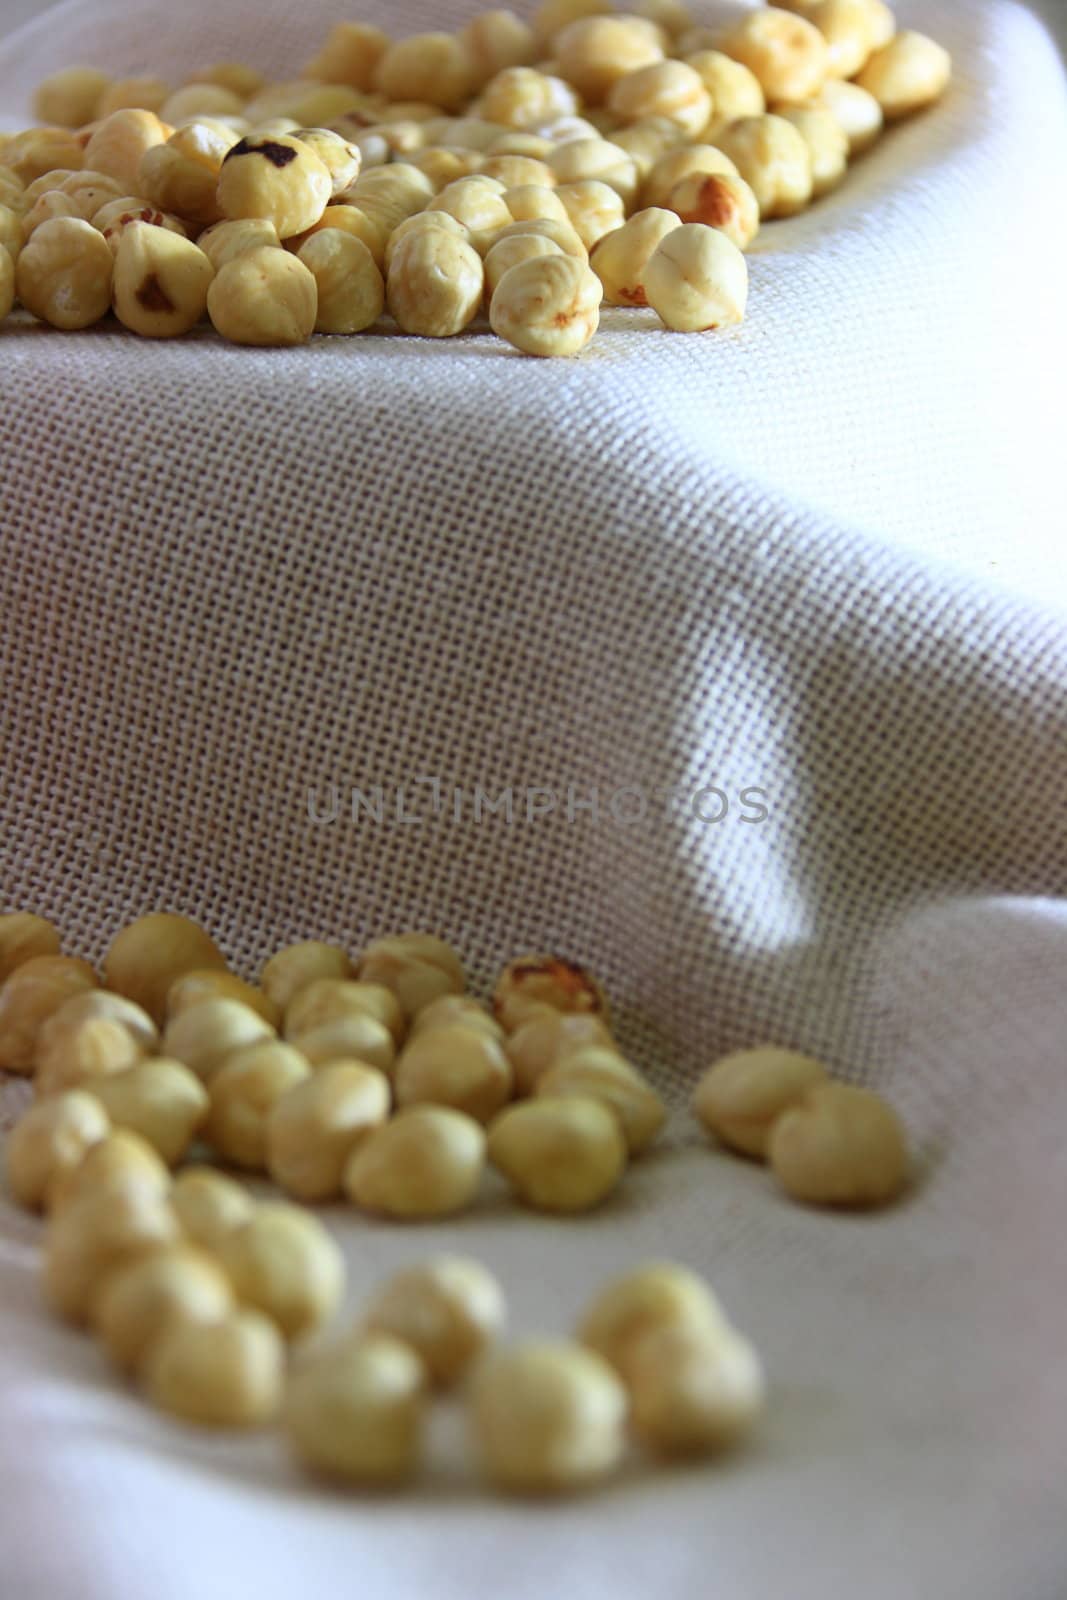 light bown fresh hazelnuts in group on natural cloth 